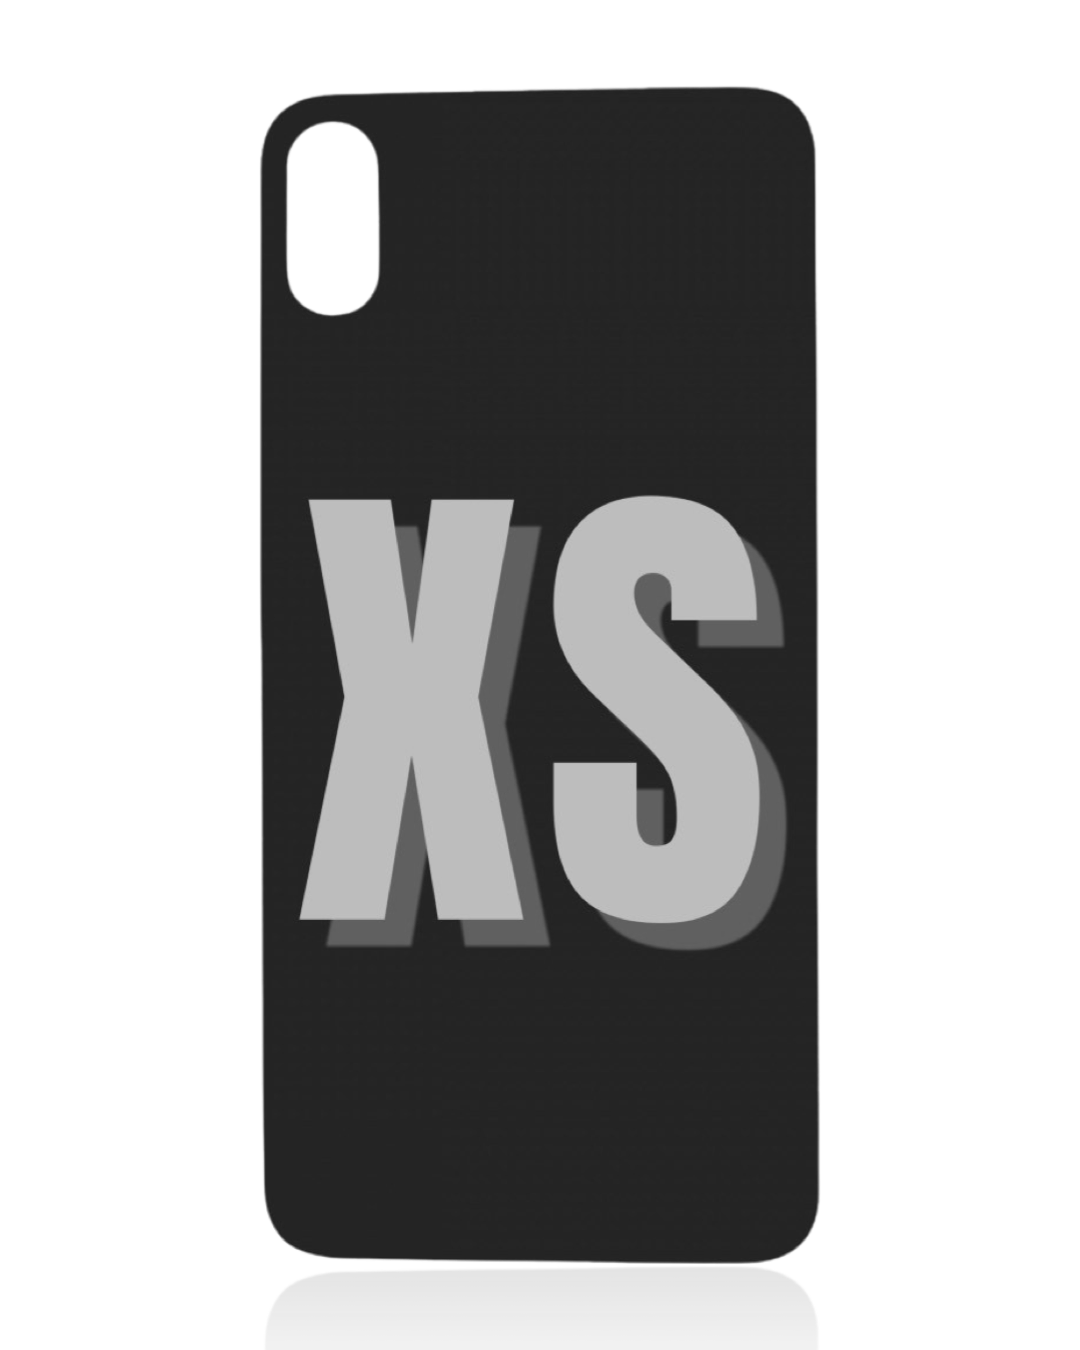 For iPhone XS Bigger Camera Hole Back Glass Replacement (All Color)